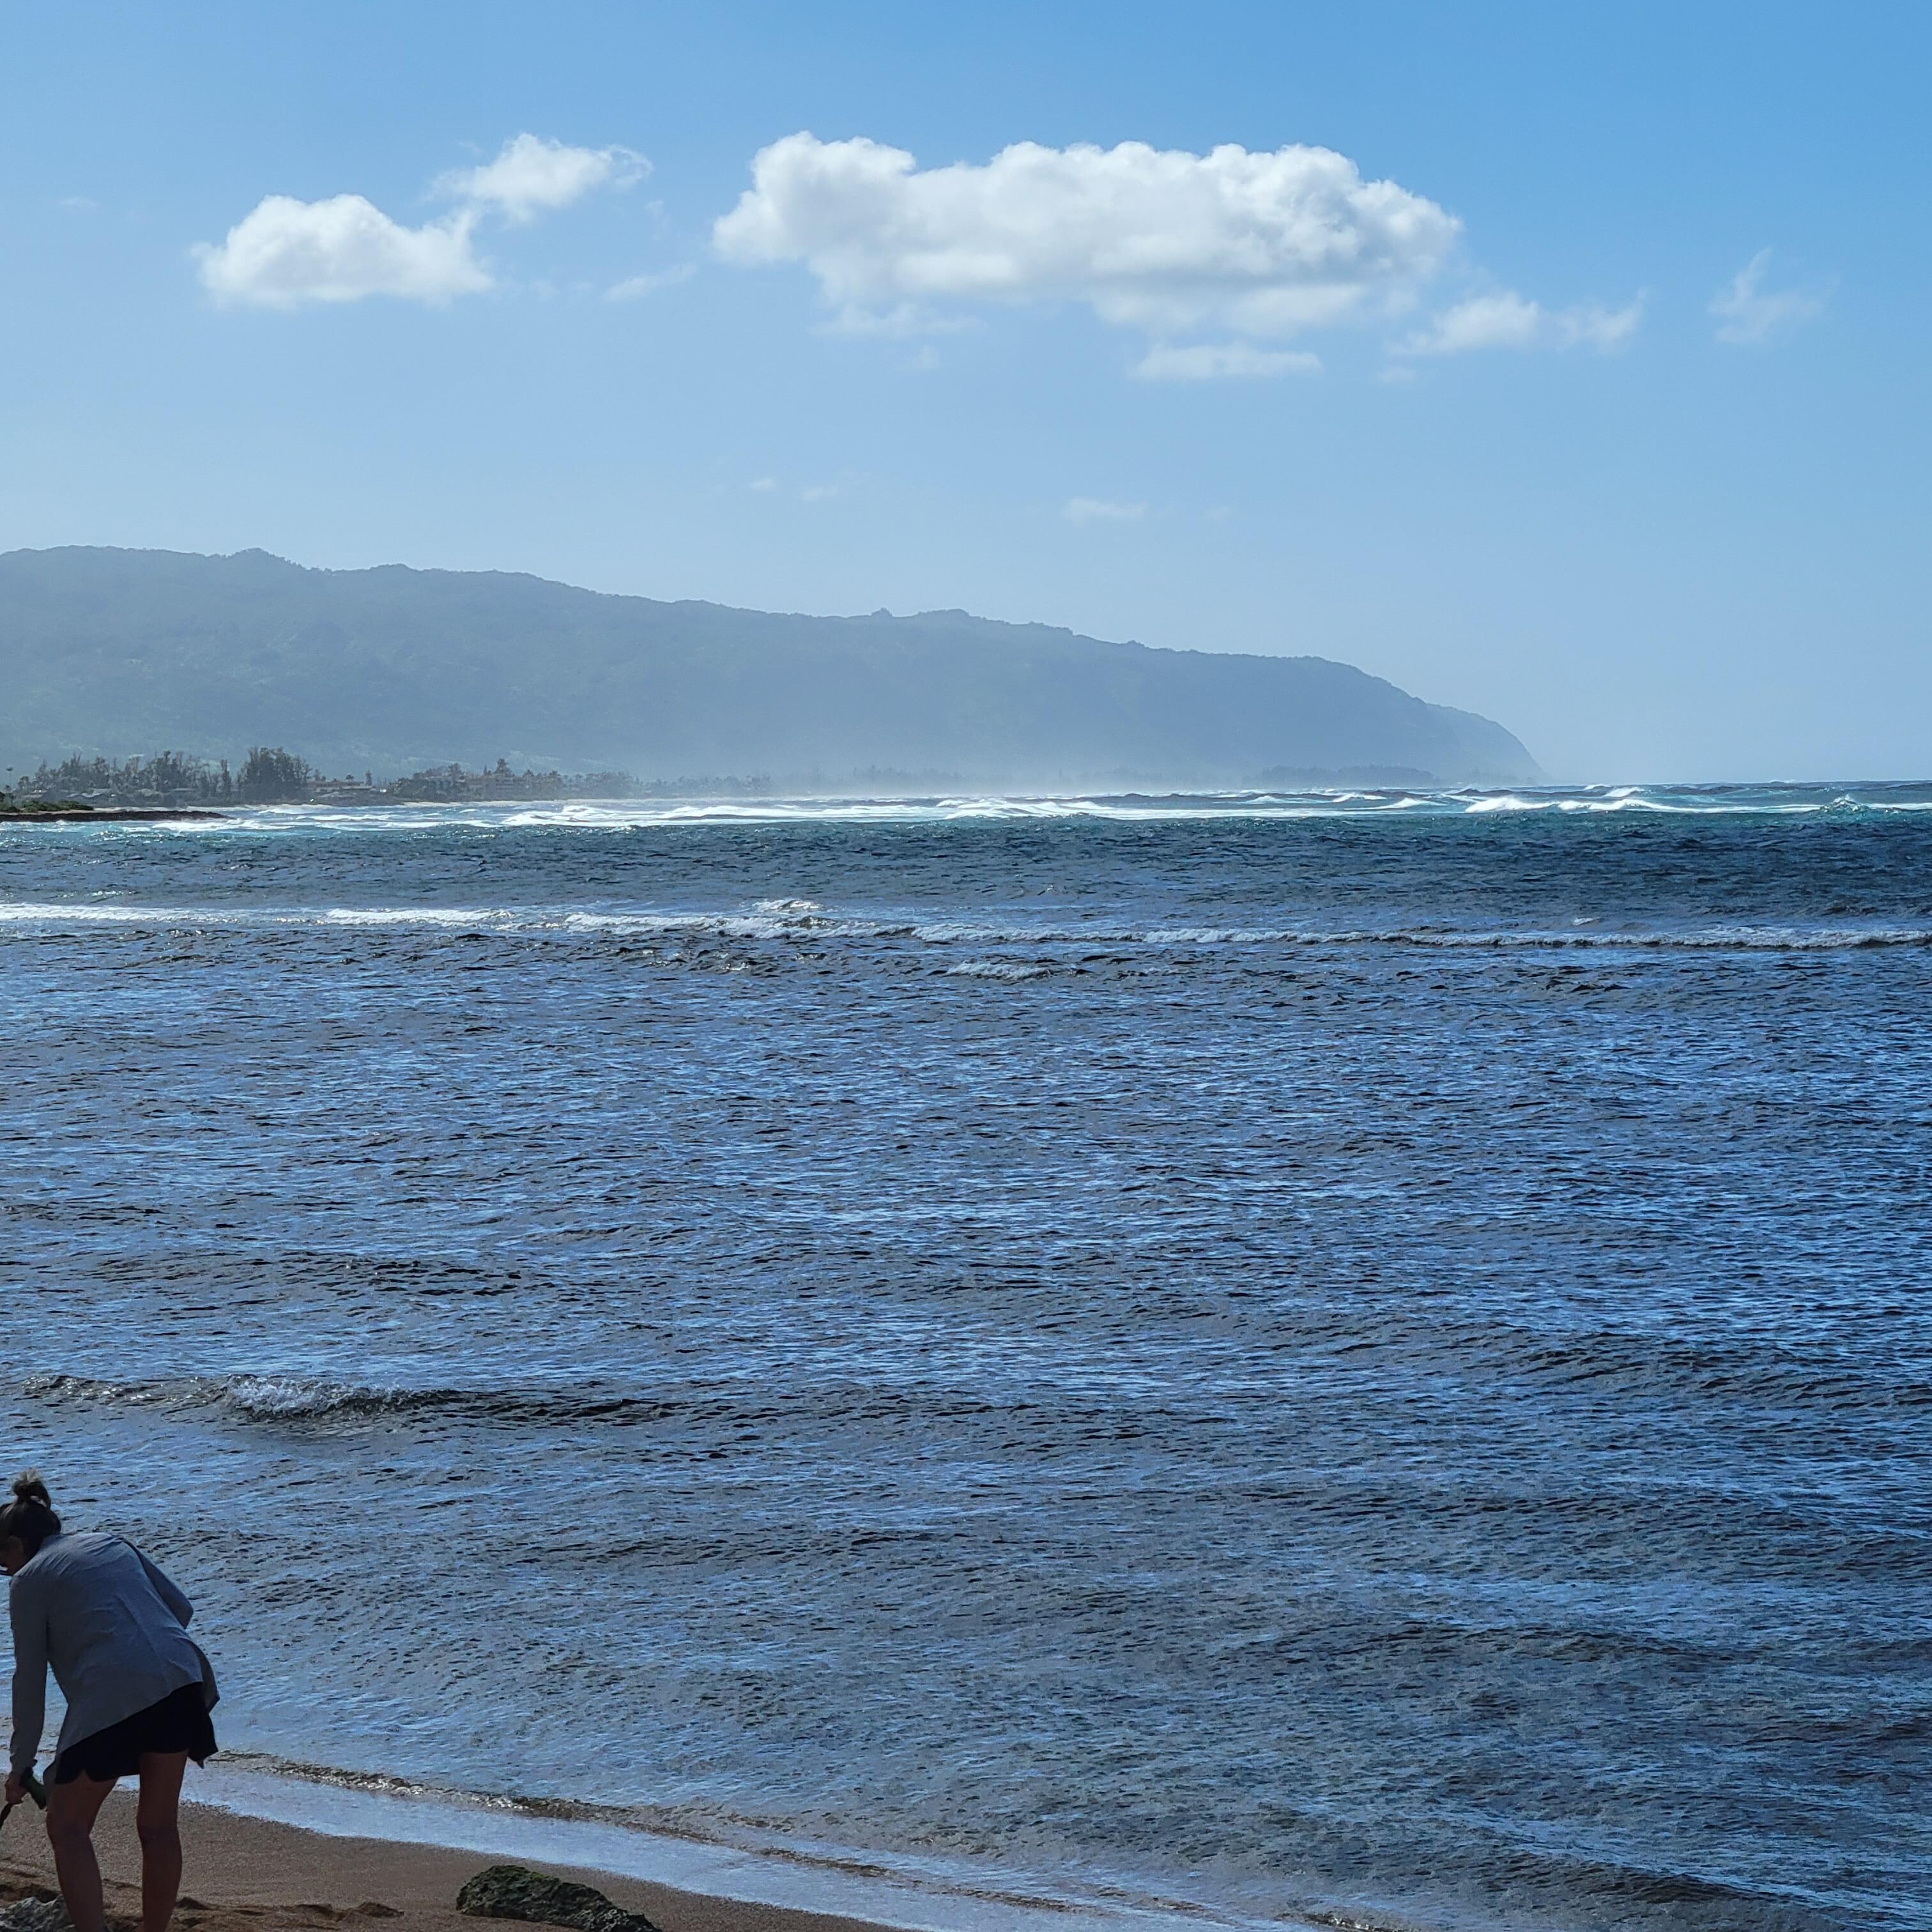 Visiting the North Shore in Hawaii